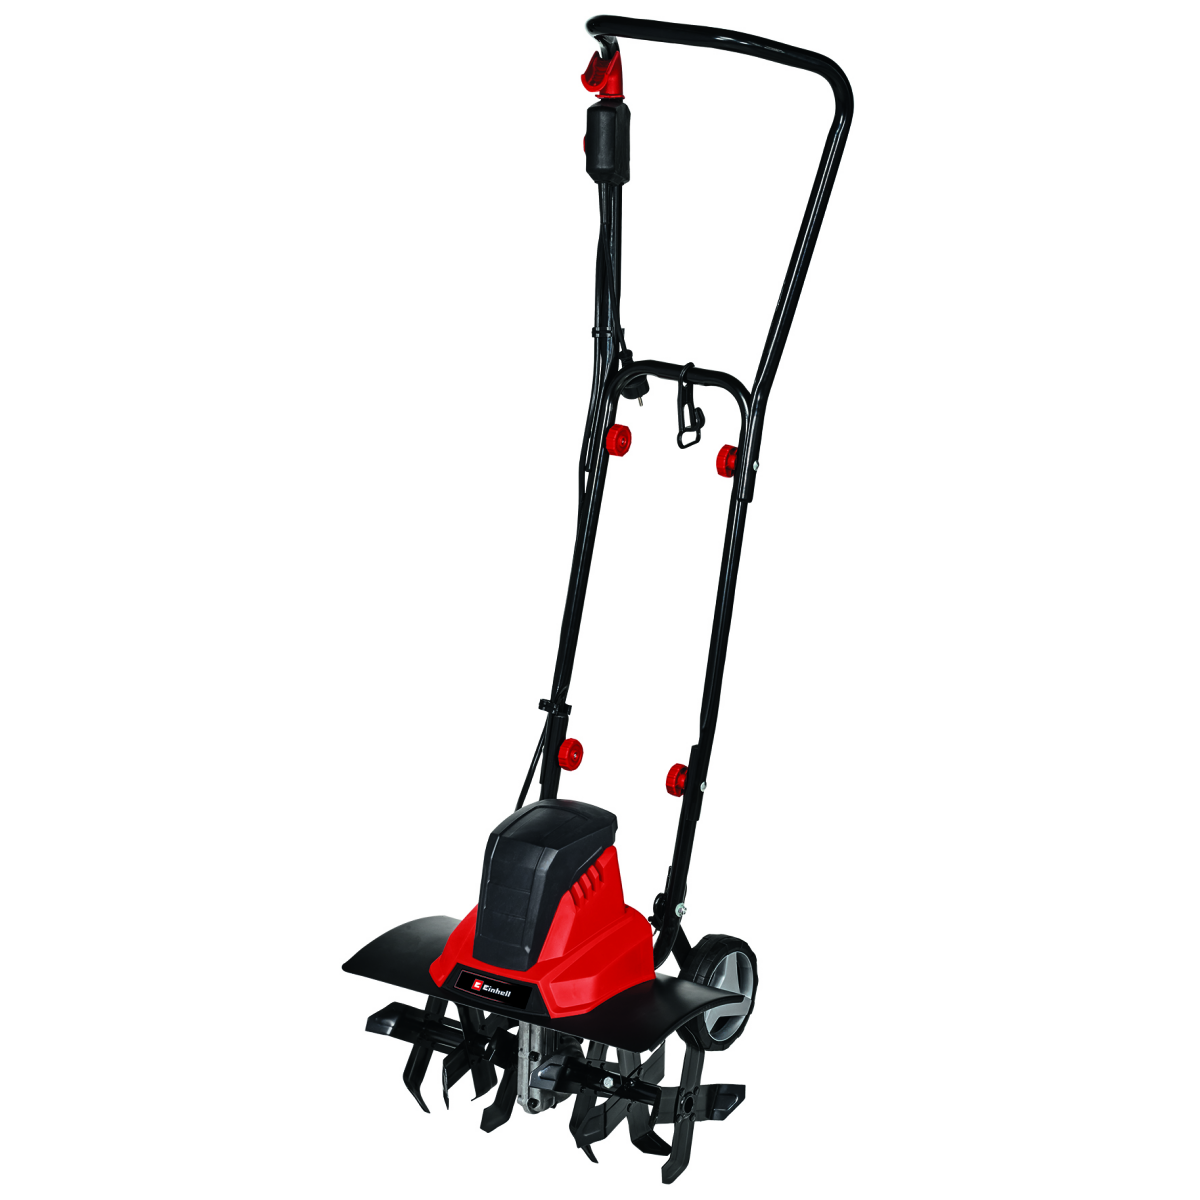 GC-RT 1545 M Grondfrees - 1500W - 450mm